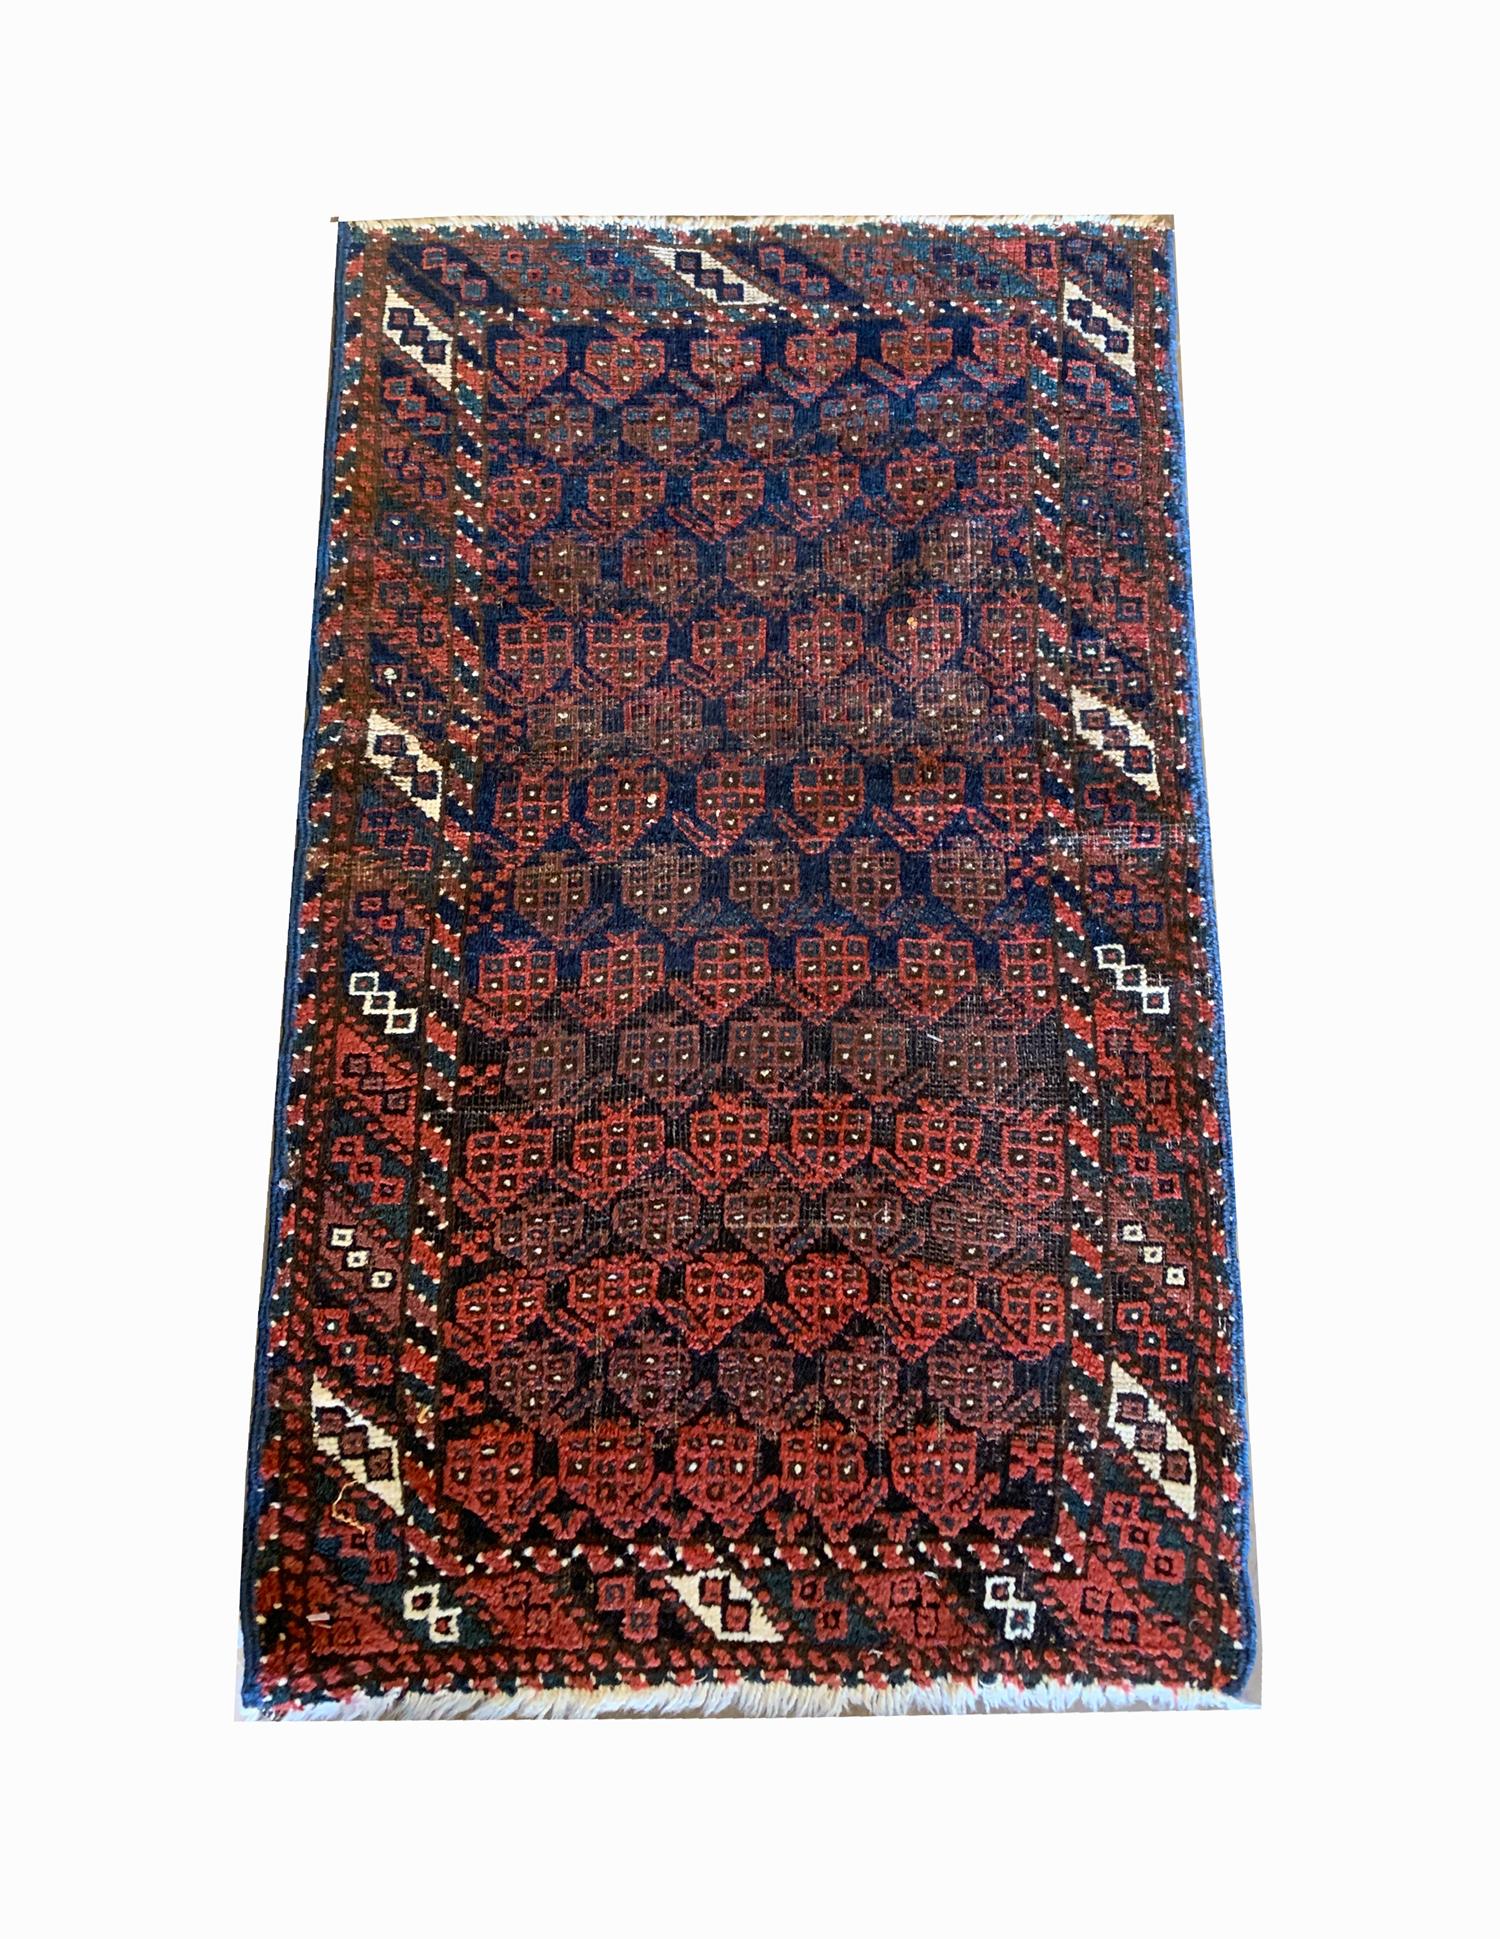 This fine wool rug was woven by hand in Afghanistan country in the Caucasus region known for there bold designs. The central design features a repeat tribal motif pattern woven in red on deep blue background. A layered geometric border has then